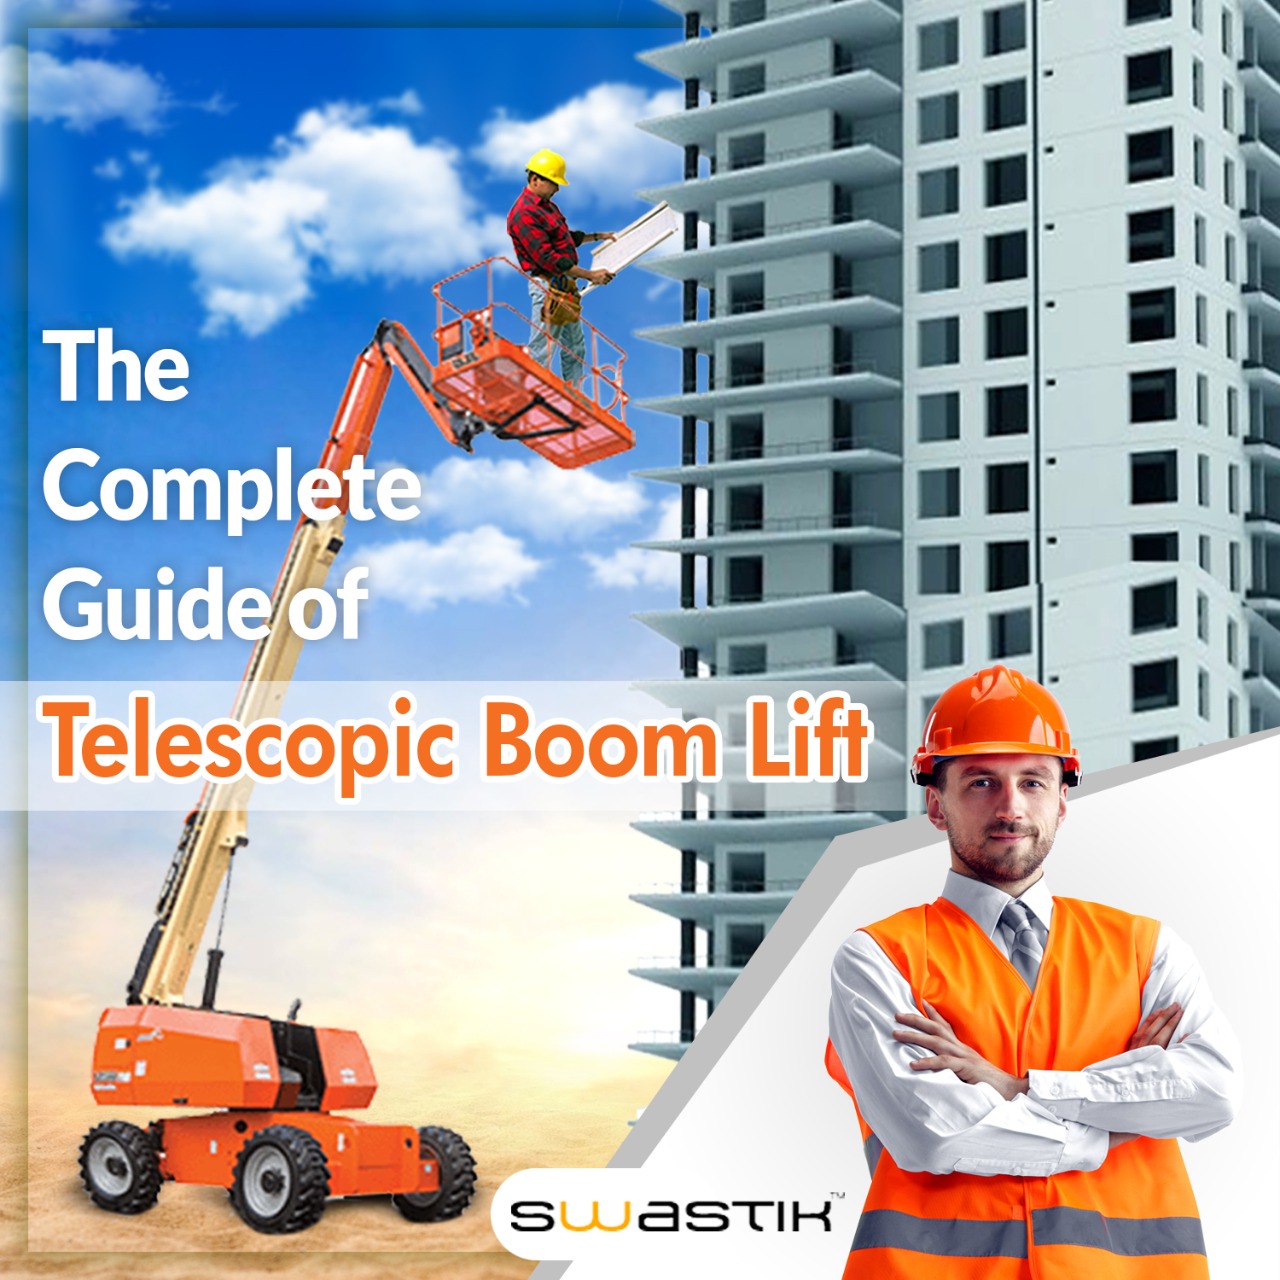 The Complete Guide of Telescopic boom lift